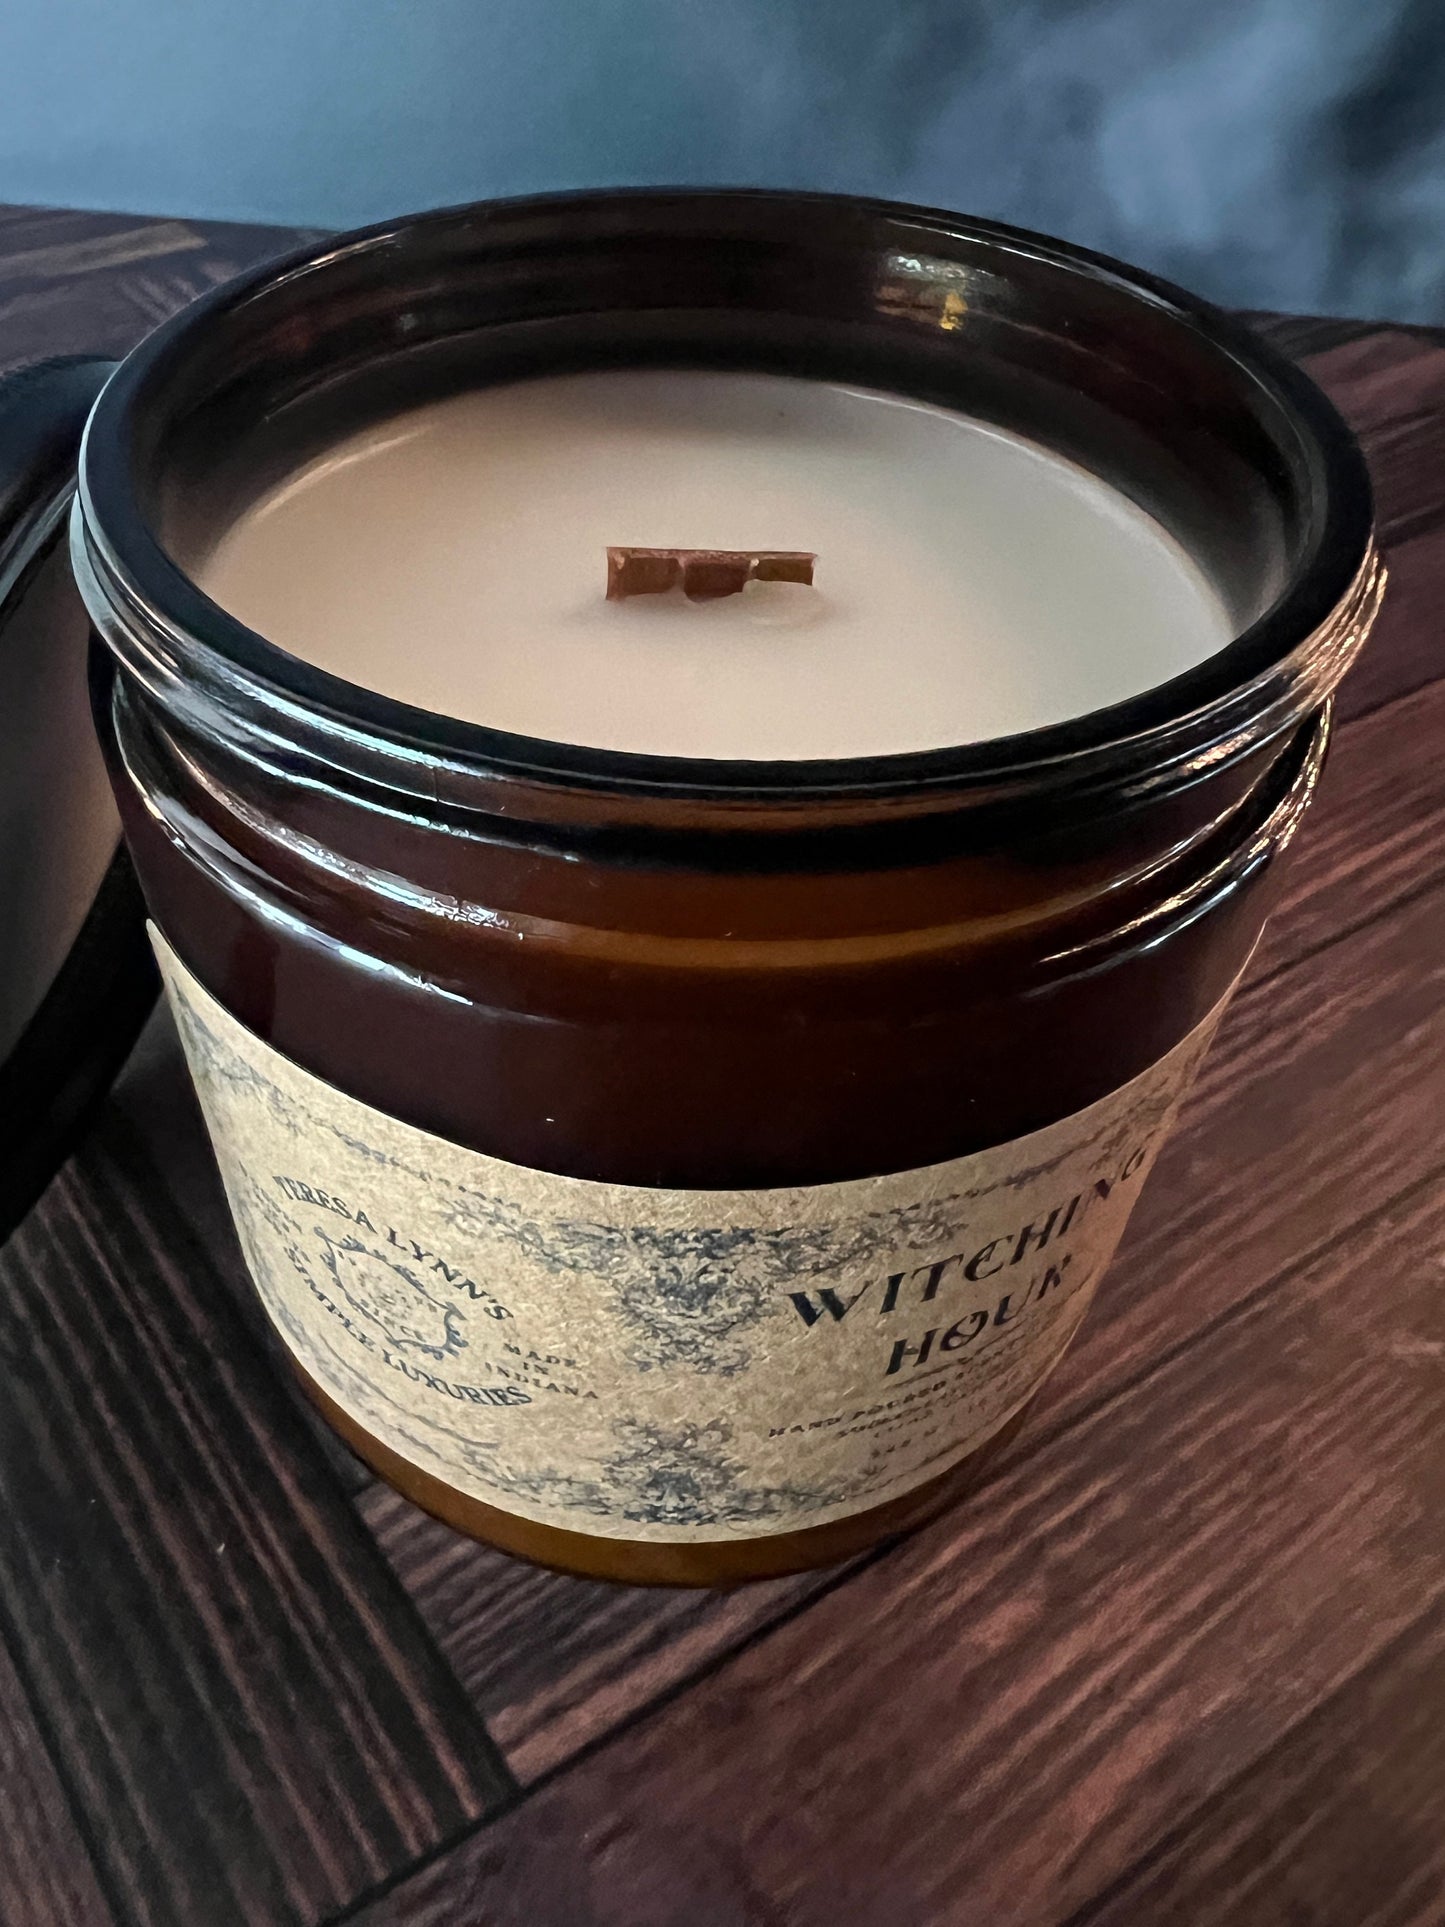 THE WITCHING HOUR  - Wooden Wick, Soy Wax Candle